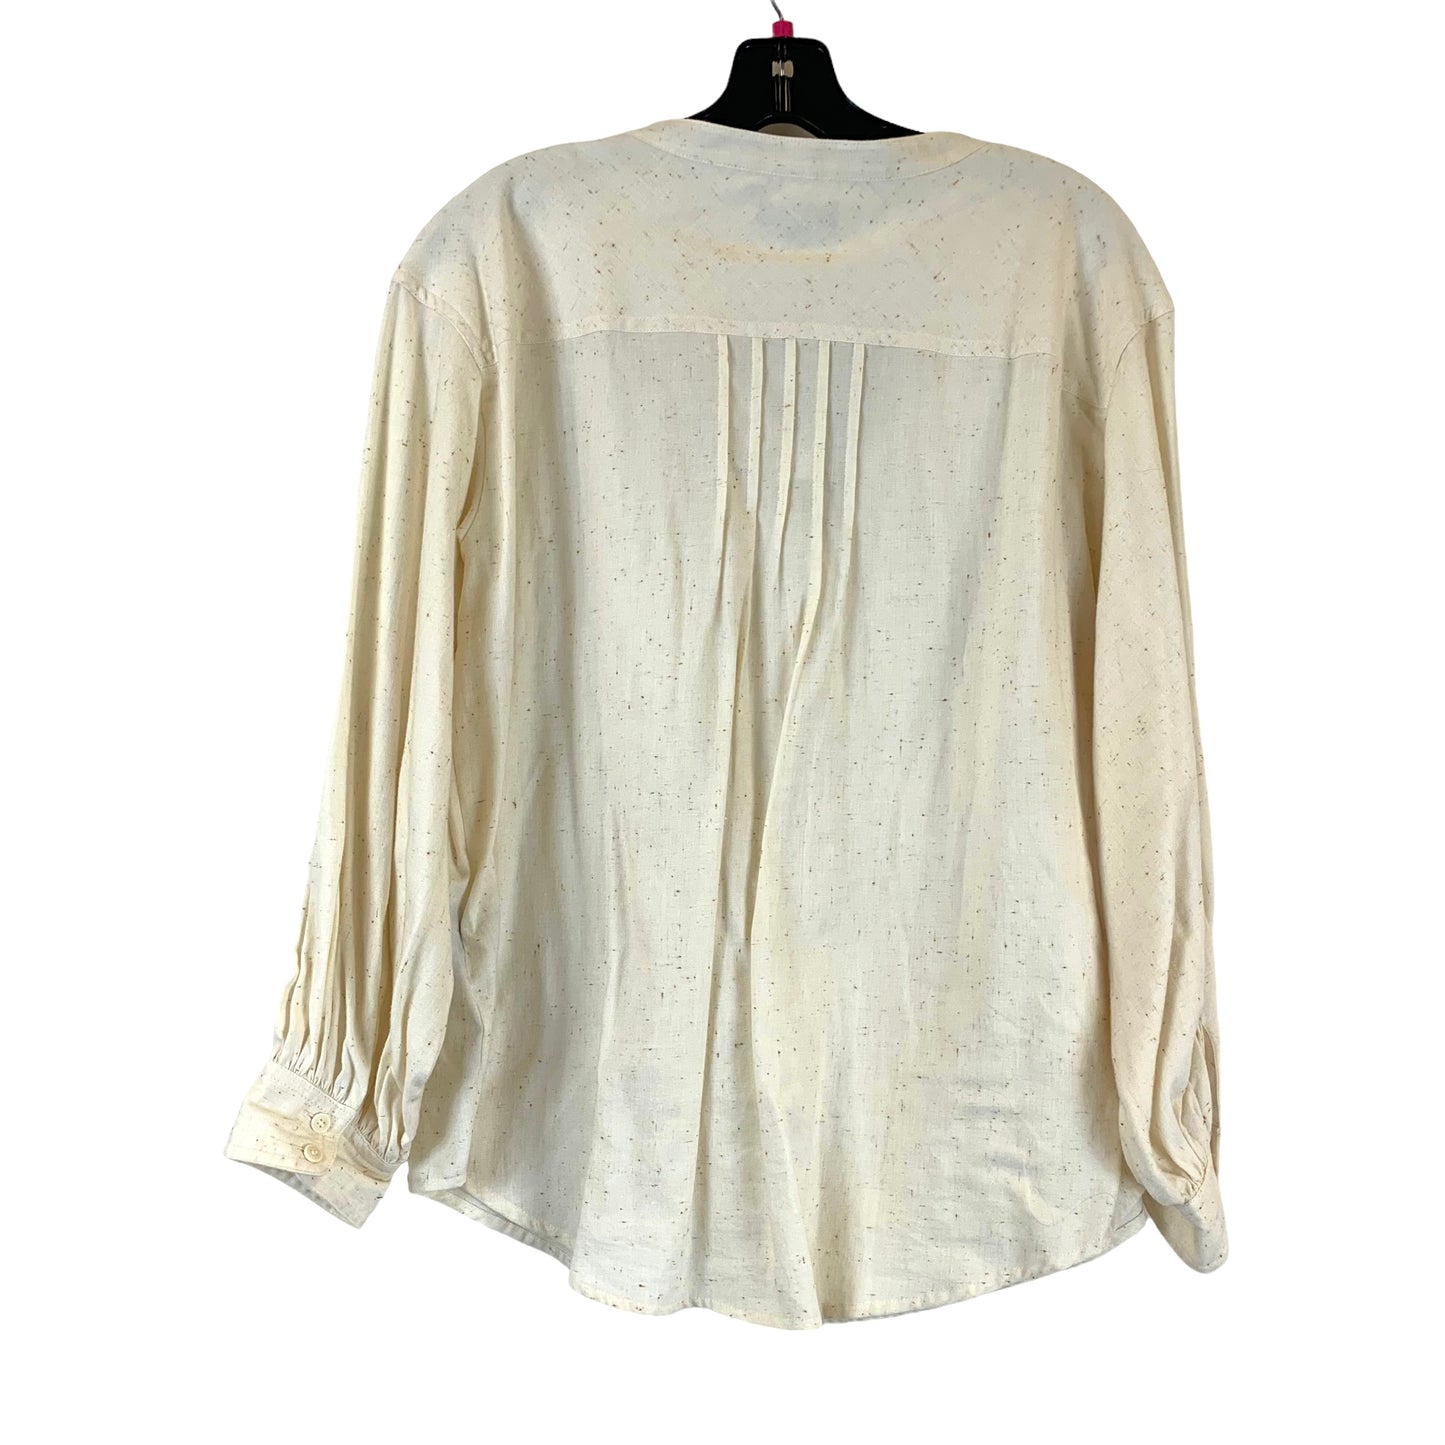 Top Long Sleeve By J Crew  Size: S